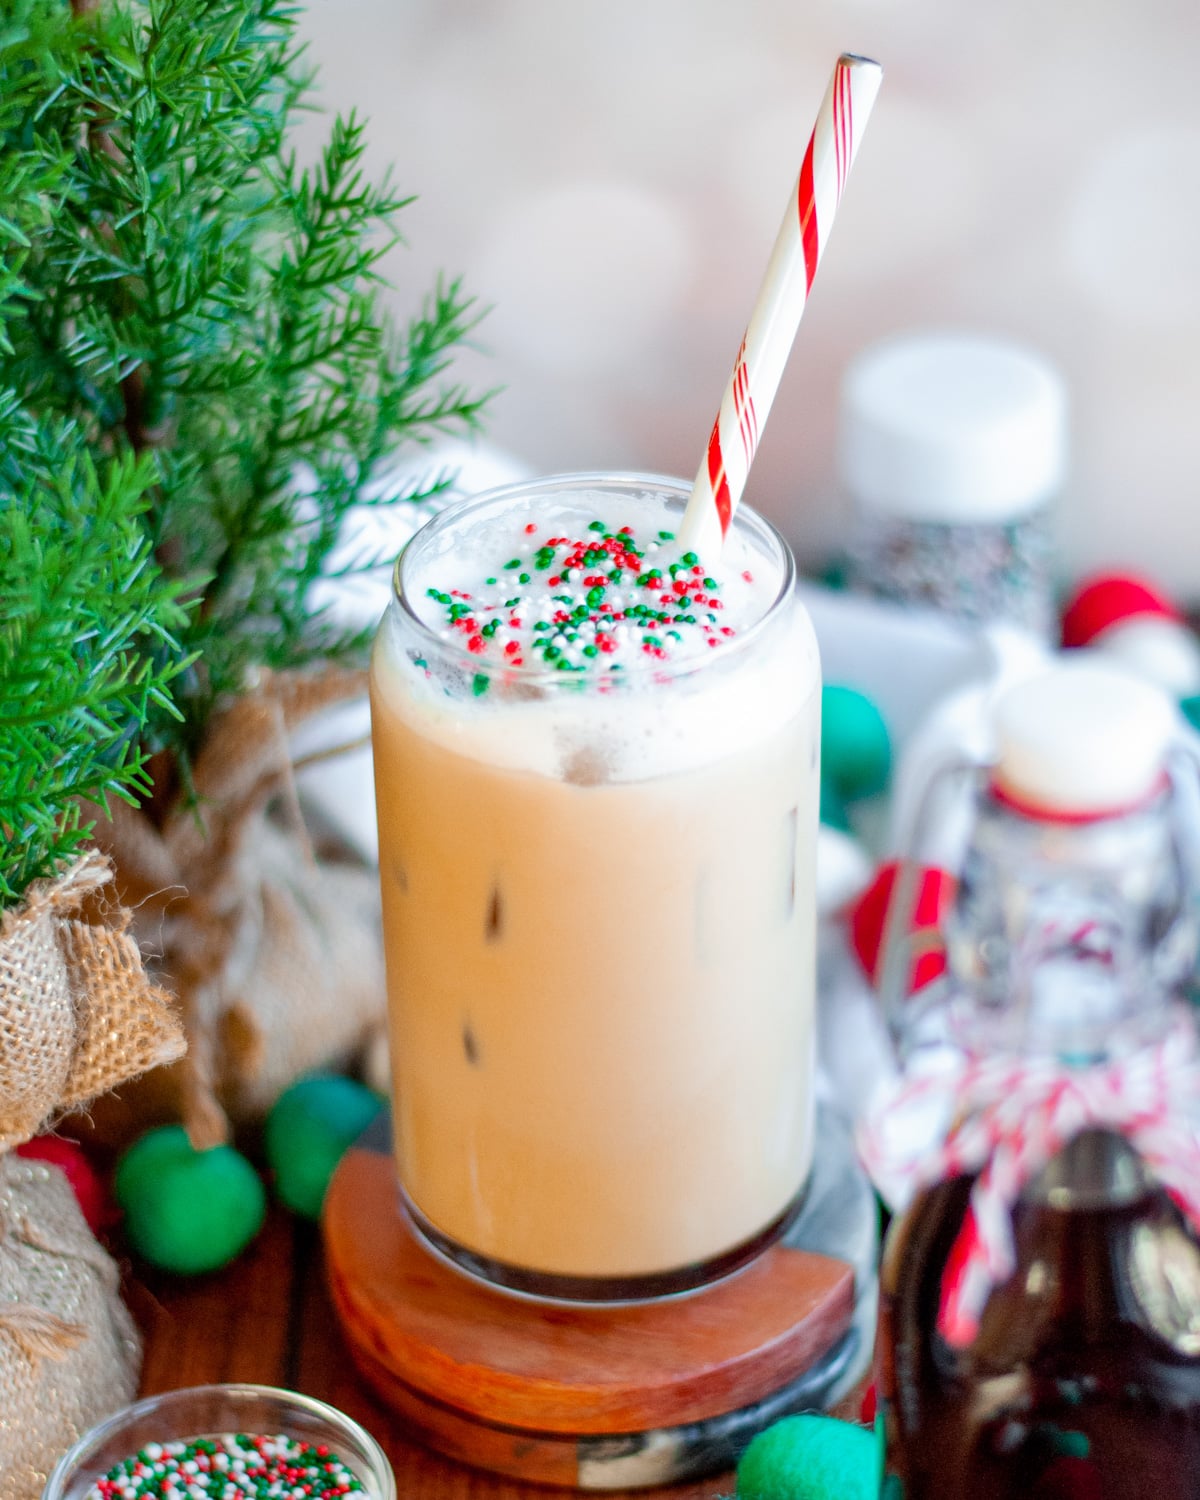 an iced sugar cookie latte with a red and white striped straw, and topped with red white and green sprinkles. The glass is surrounded by holiday felt-ball garland, containers of sprinkles, a jar of sugar cookie simple syrup with a bow, a white linen, and greenery.